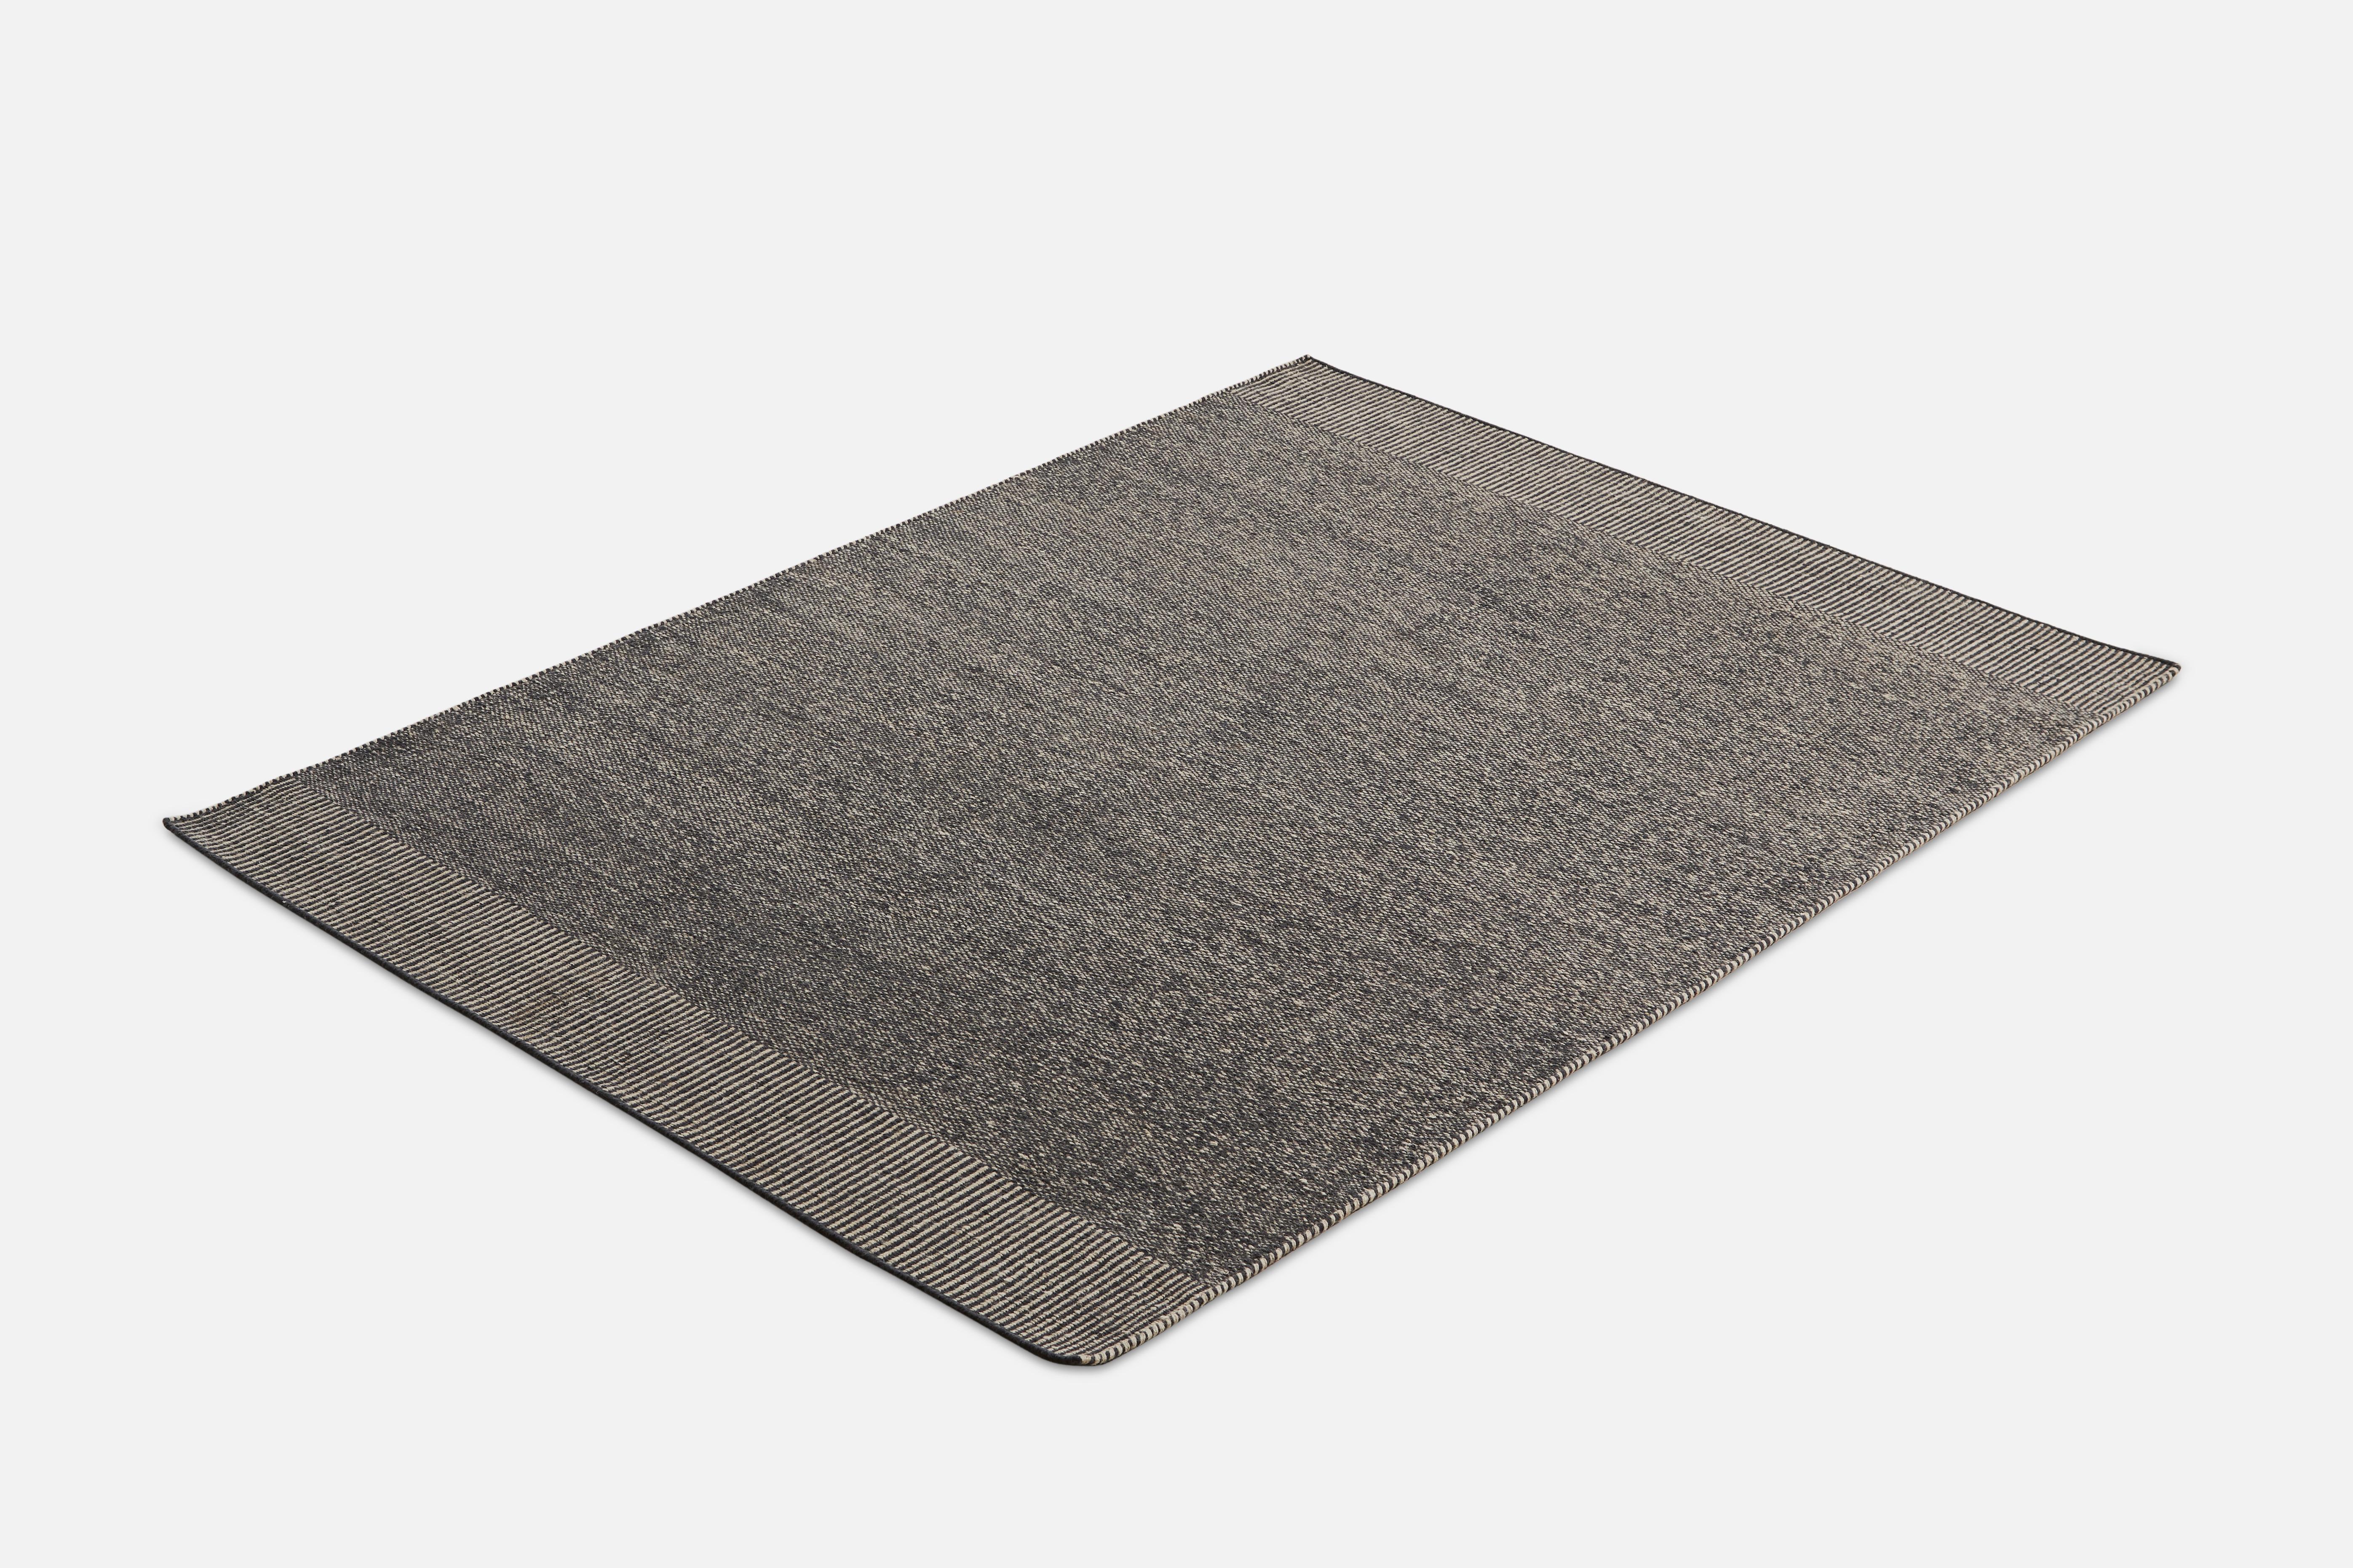 Large Grey Rombo rug by Studio MLR.
Materials: 65% wool, 35% jute.
Dimensions: W 170 x L 240 cm.
Available in 3 sizes: W 90 x L 140, W 170 x L 240, W 75 x L 200 cm.
Available in grey, moss green and rust.

Rombo is characterised by the